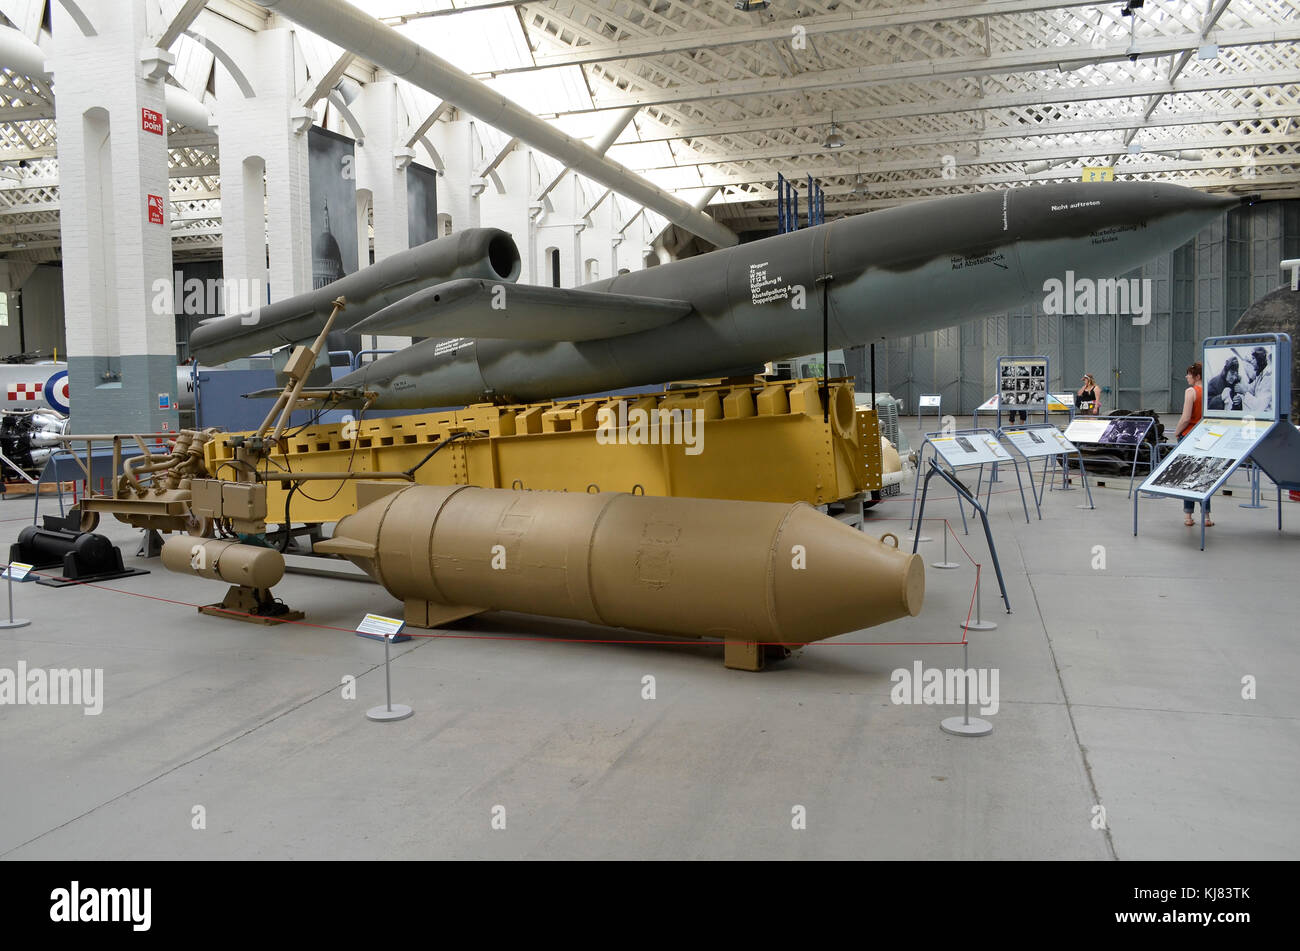 V-1 Flying Bomb with launch ramp, Duxford IWM, UK. The Fieseler Fi 103 or V-1 was also commonly known as the Doodlebug or the Buzz Bomb. Stock Photo